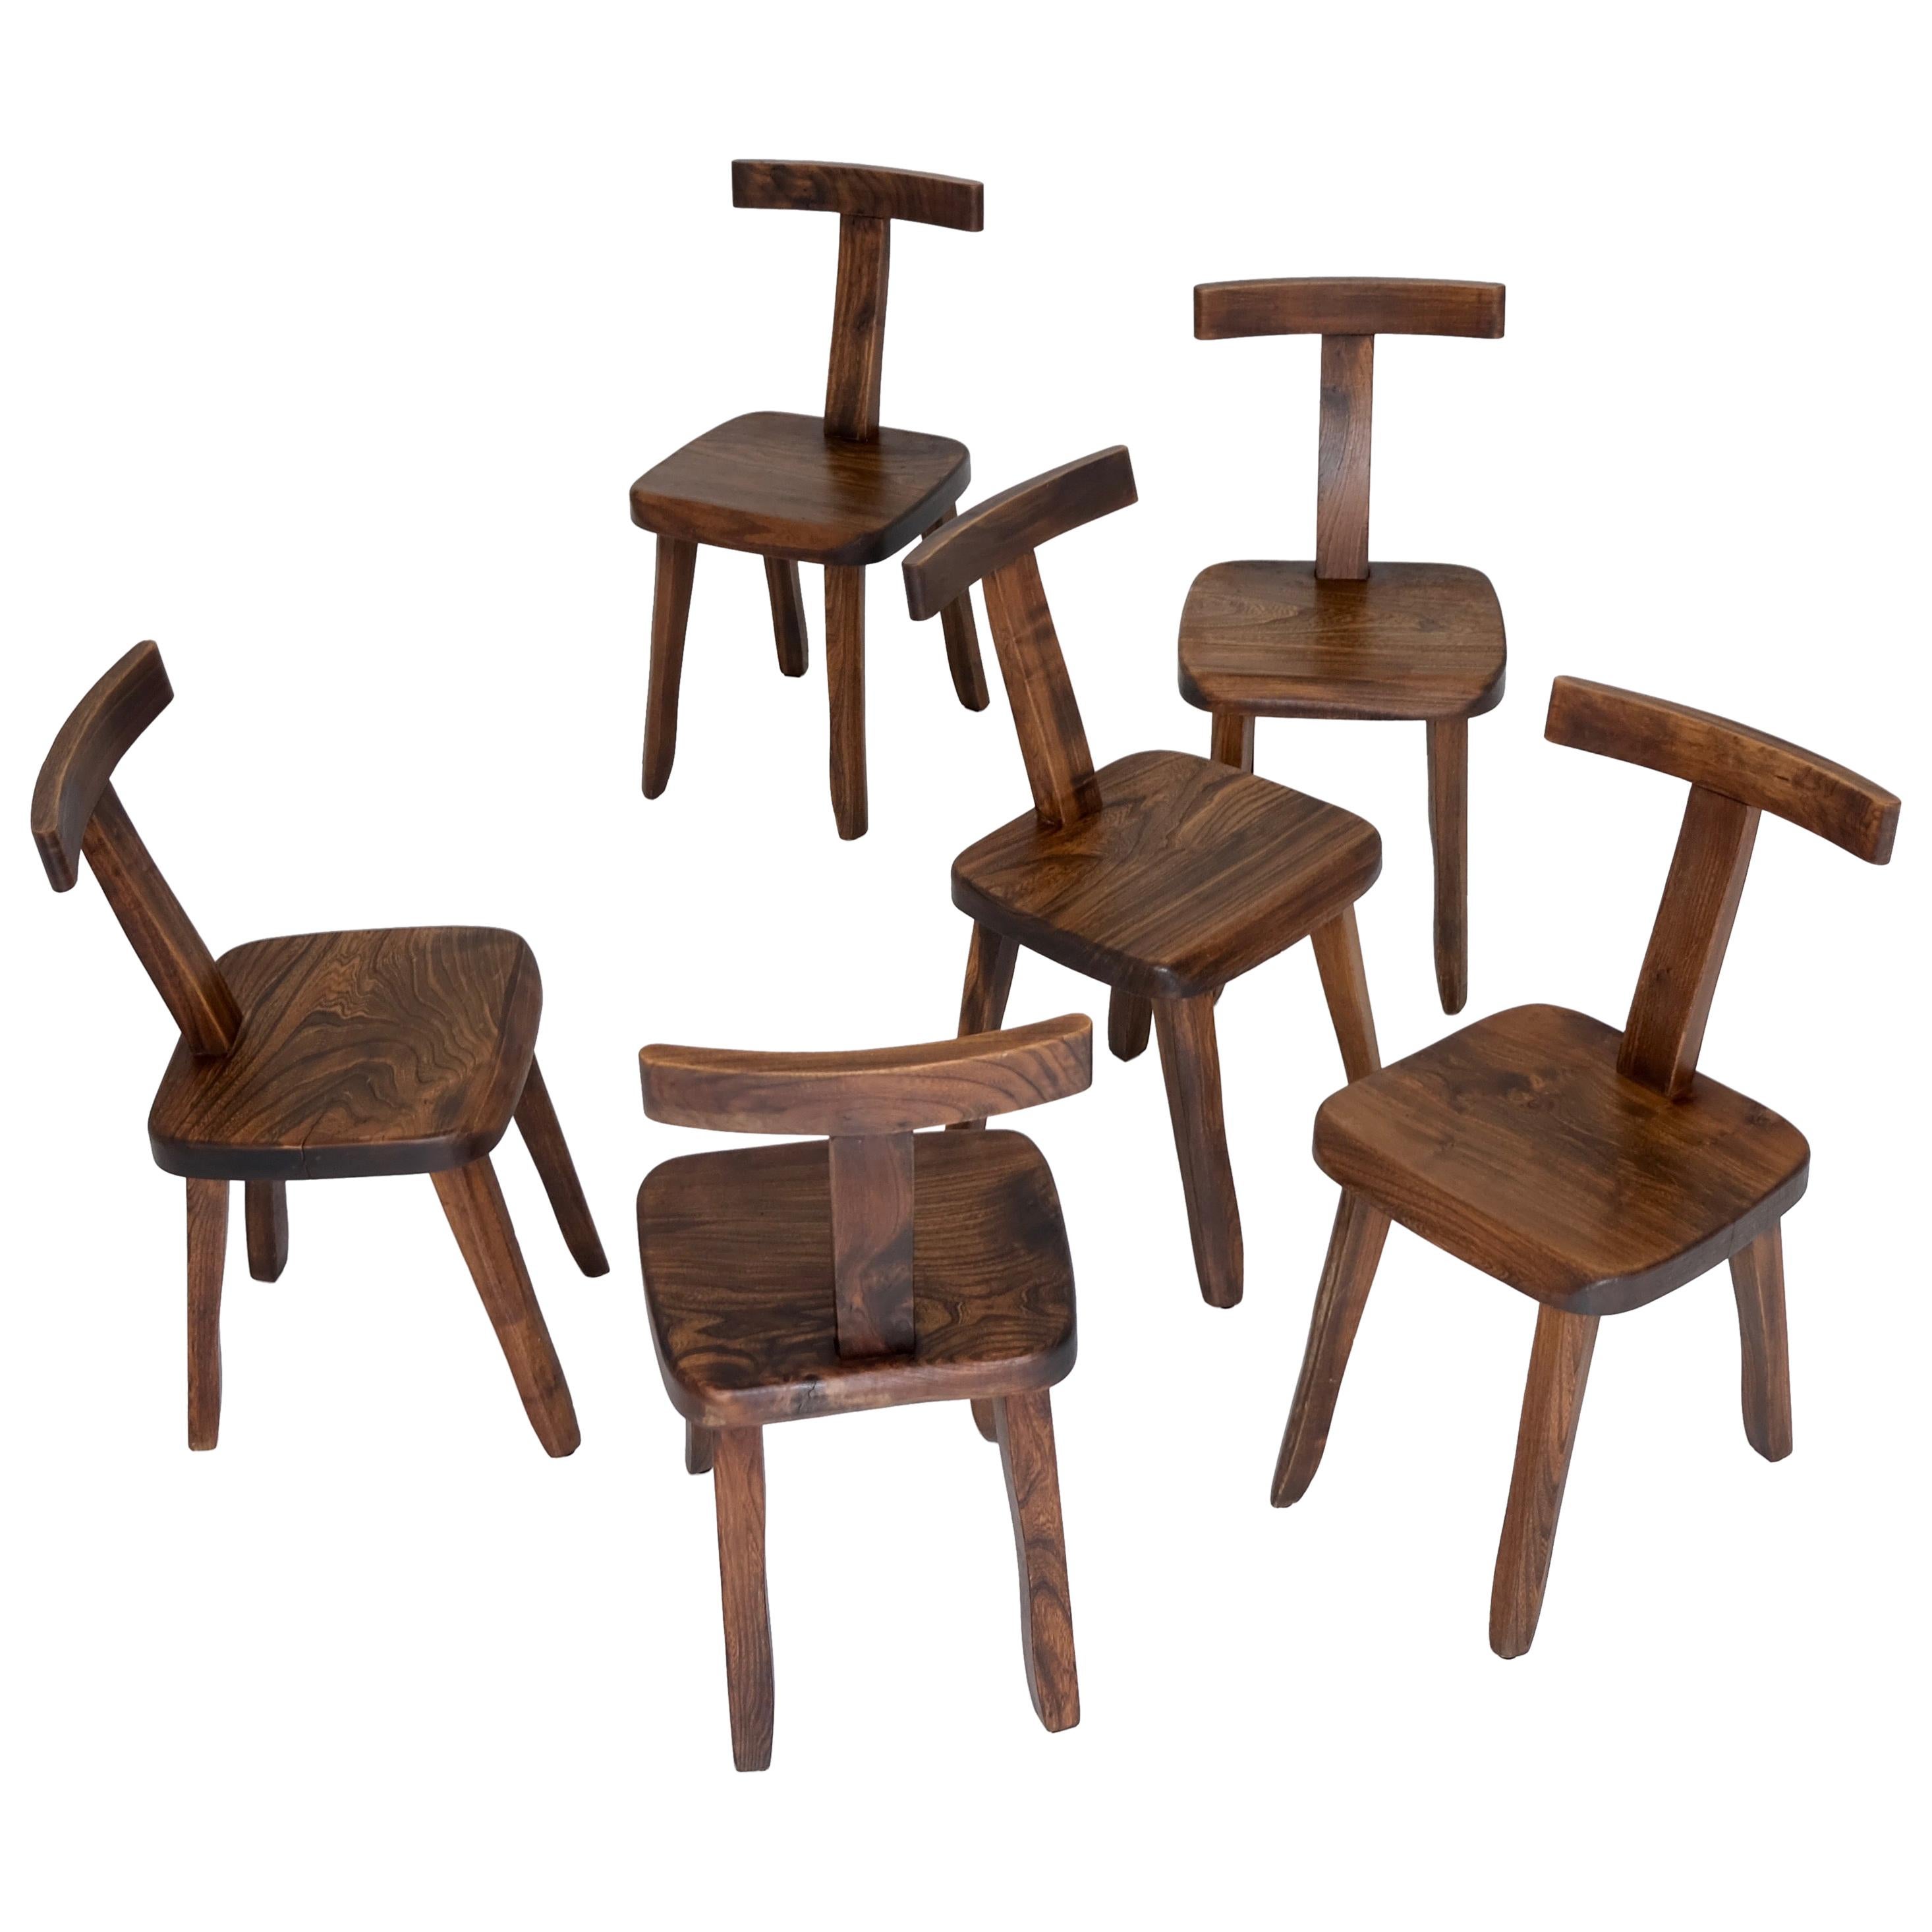 Set of 6 Brutalistic, Minimalistic Dining or Side Chairs Made of Elm Wood